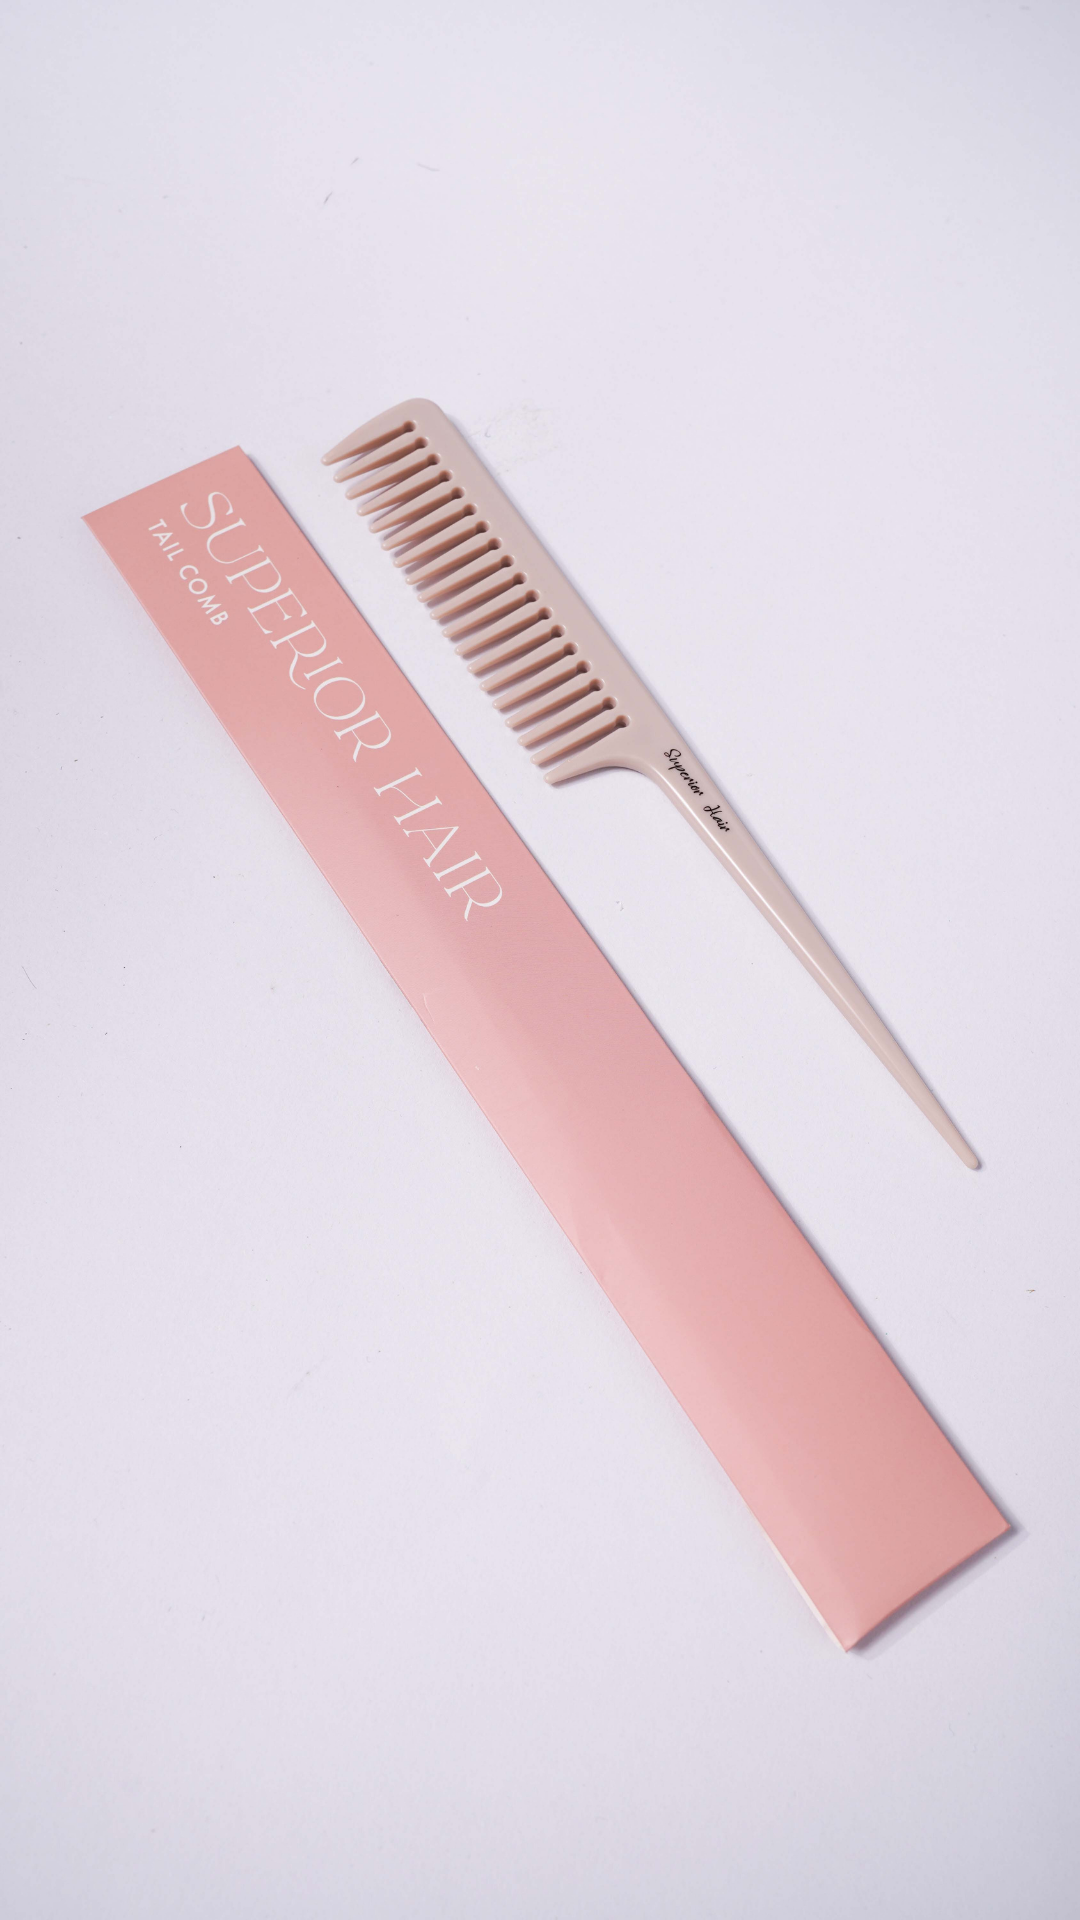 Superior Hair Tail Comb